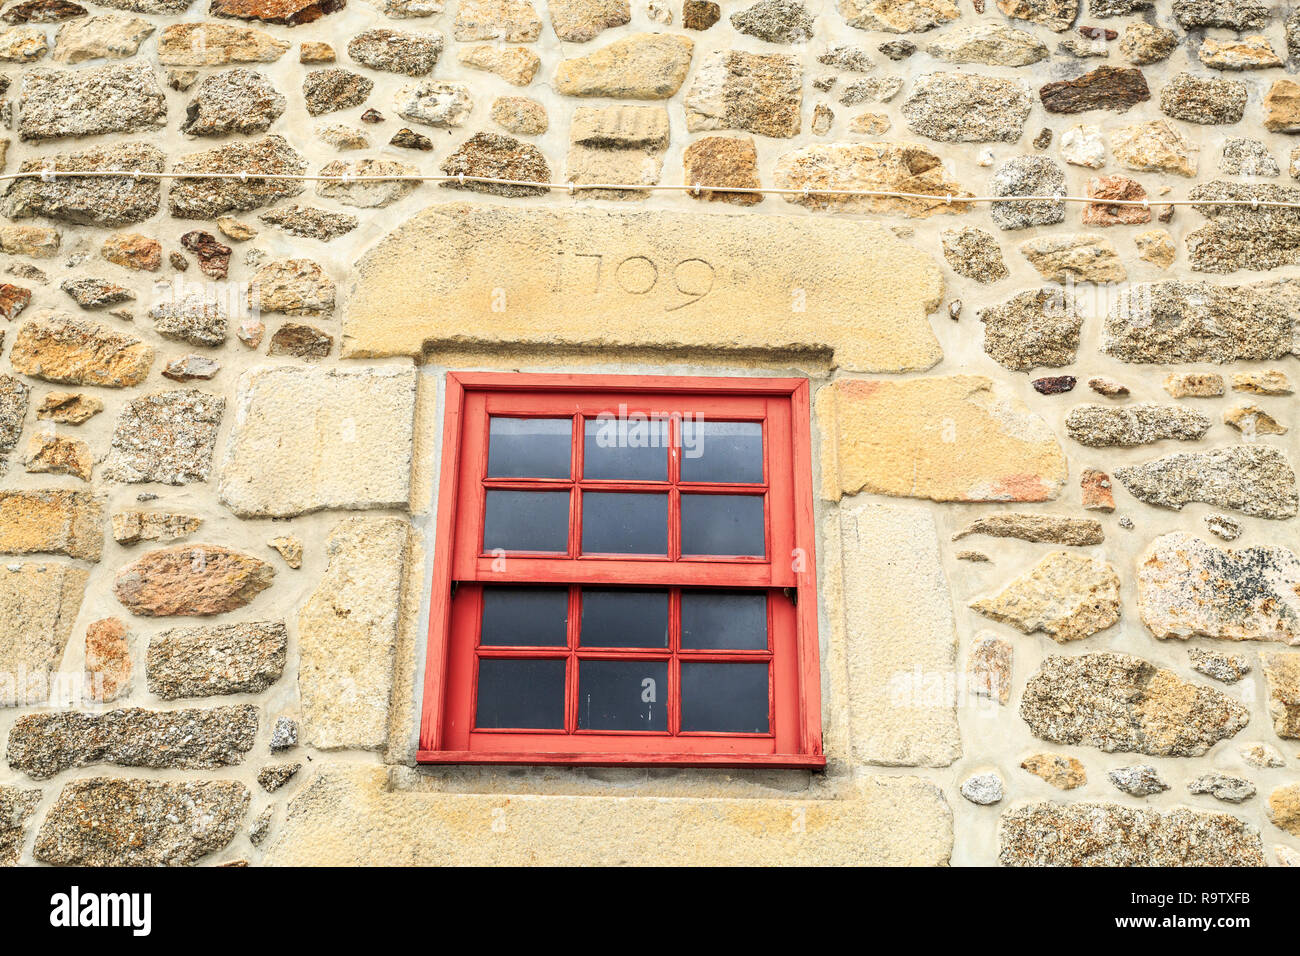 Red guillotine window on a stone framed window with date on top in the historic village of Linhares da Beira, Gouveia, Portugal Stock Photo